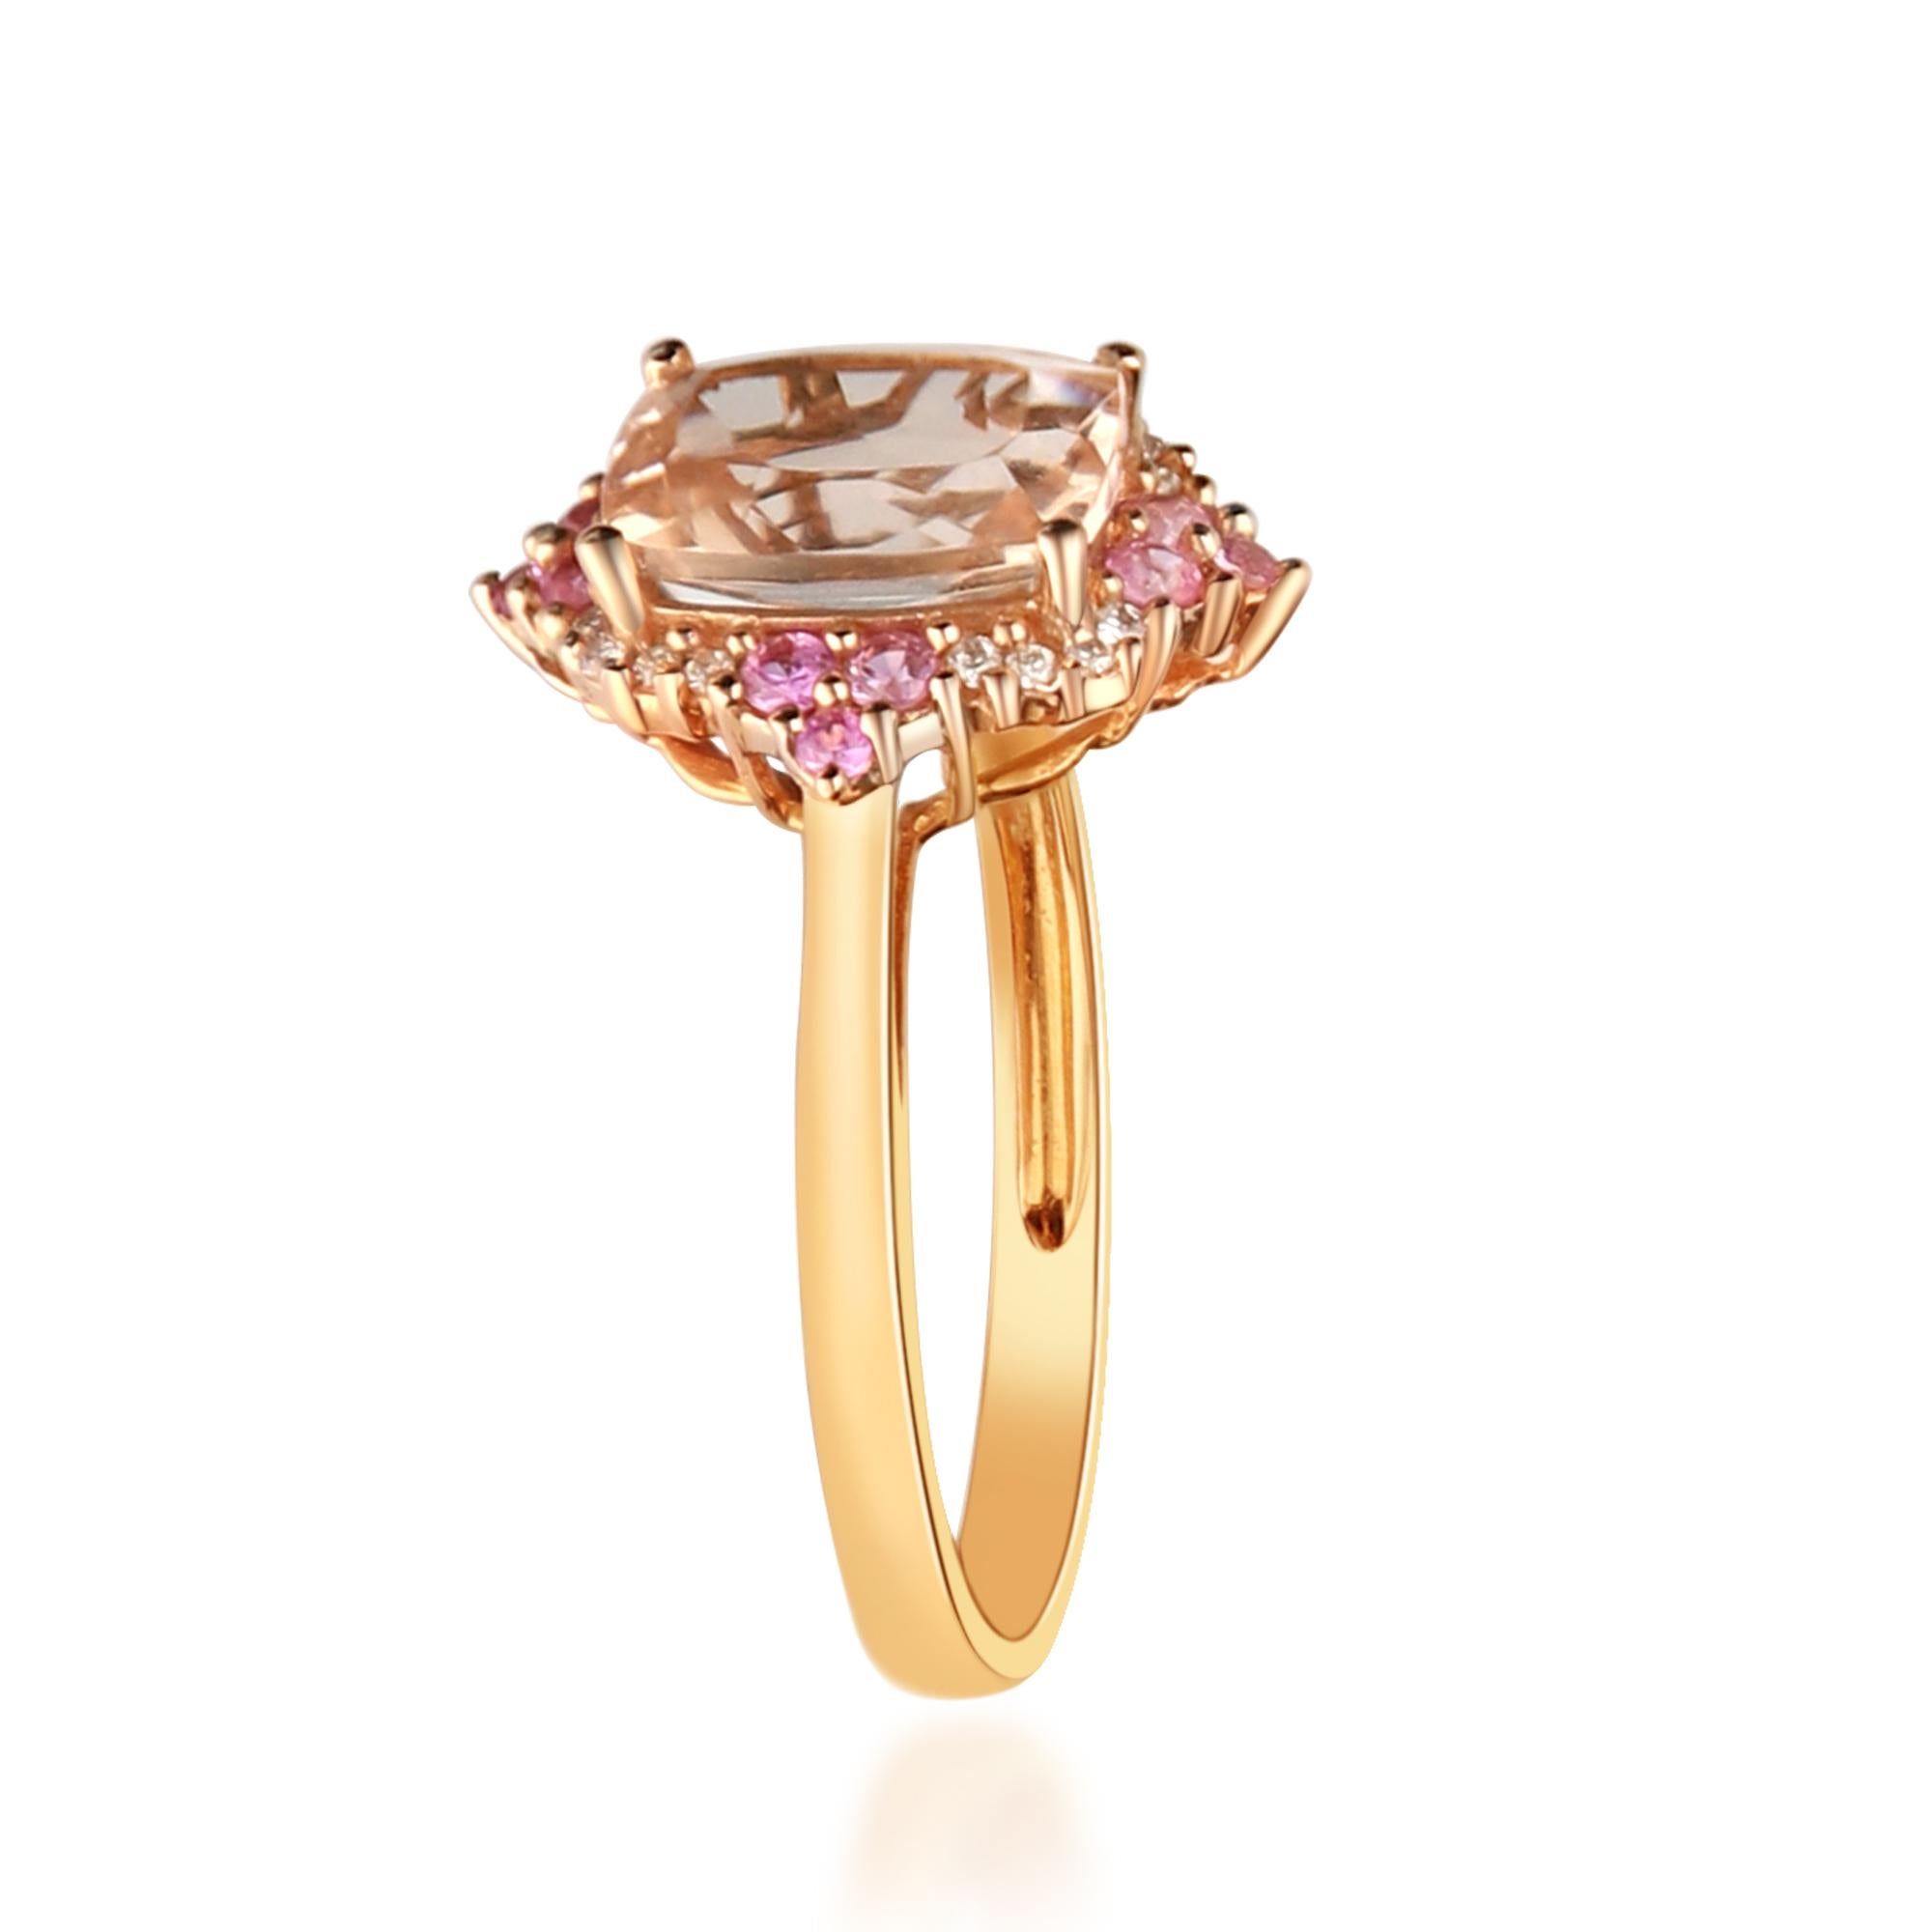 This lovely ring from Gin & Grace offers a large emerald-cut Genuine morganite center stone surrounded by round-cut Genuine pink sapphires and Natural white diamonds. The 14-karat rose gold construction of this jewelry is finished with an attractive